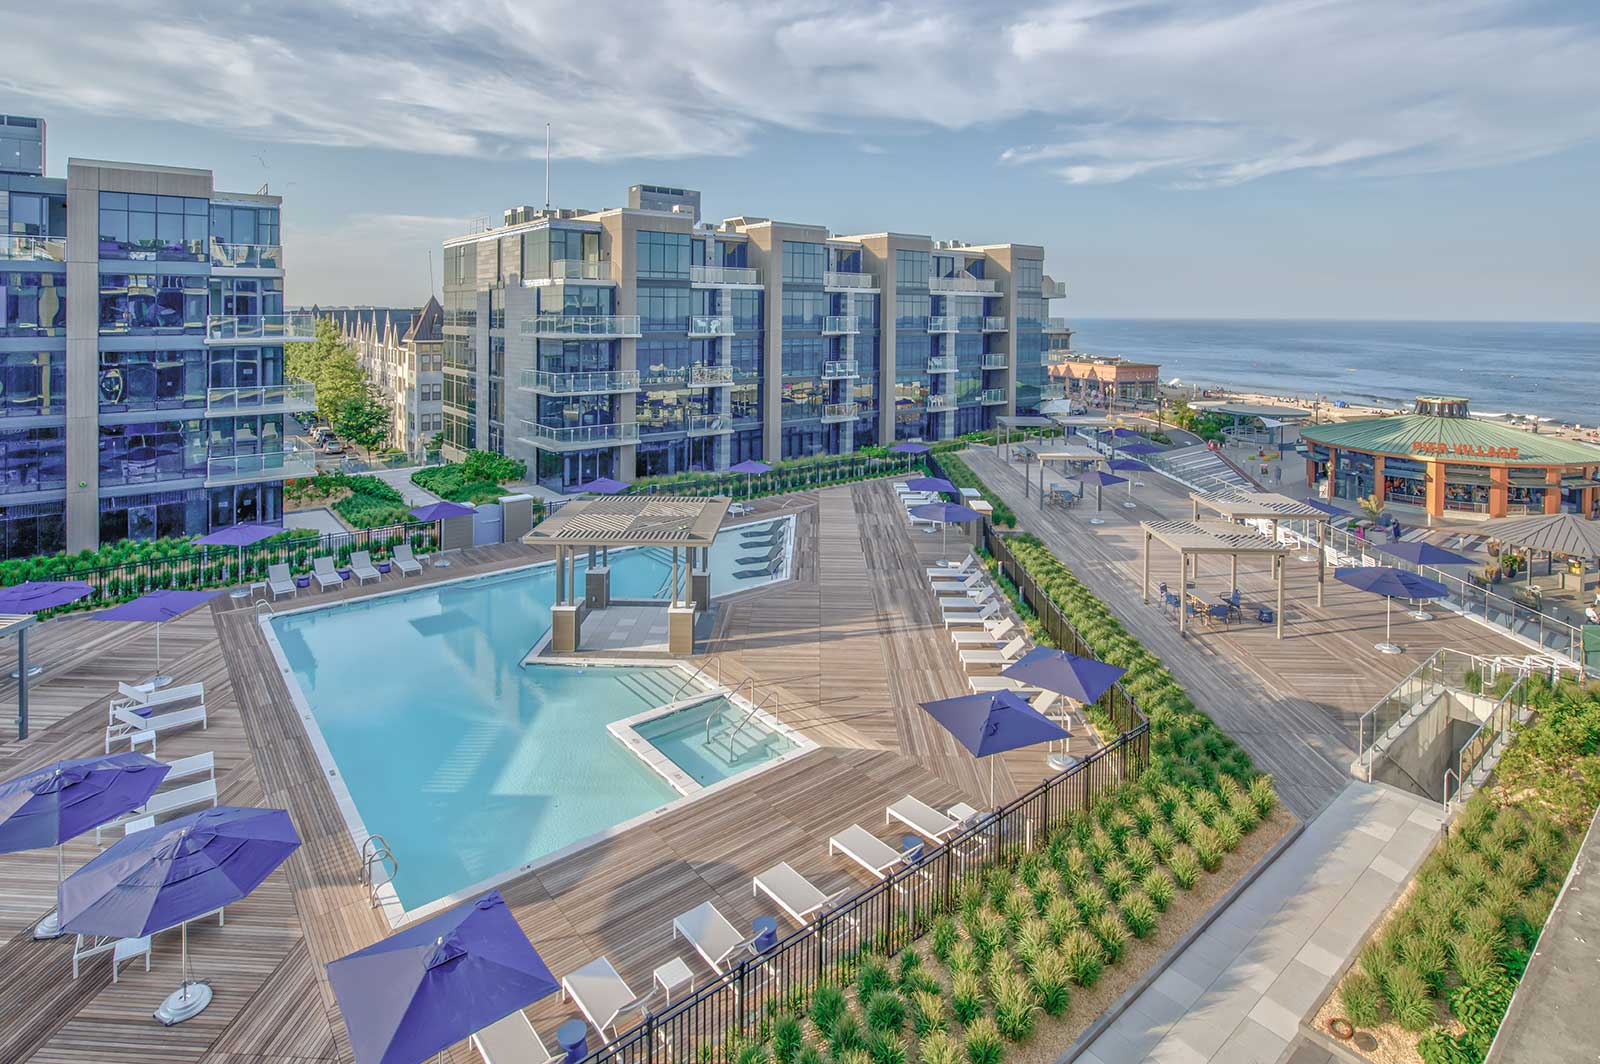 Luxury Condominium “The Lofts Pier Village” in Long Branch Sells Out